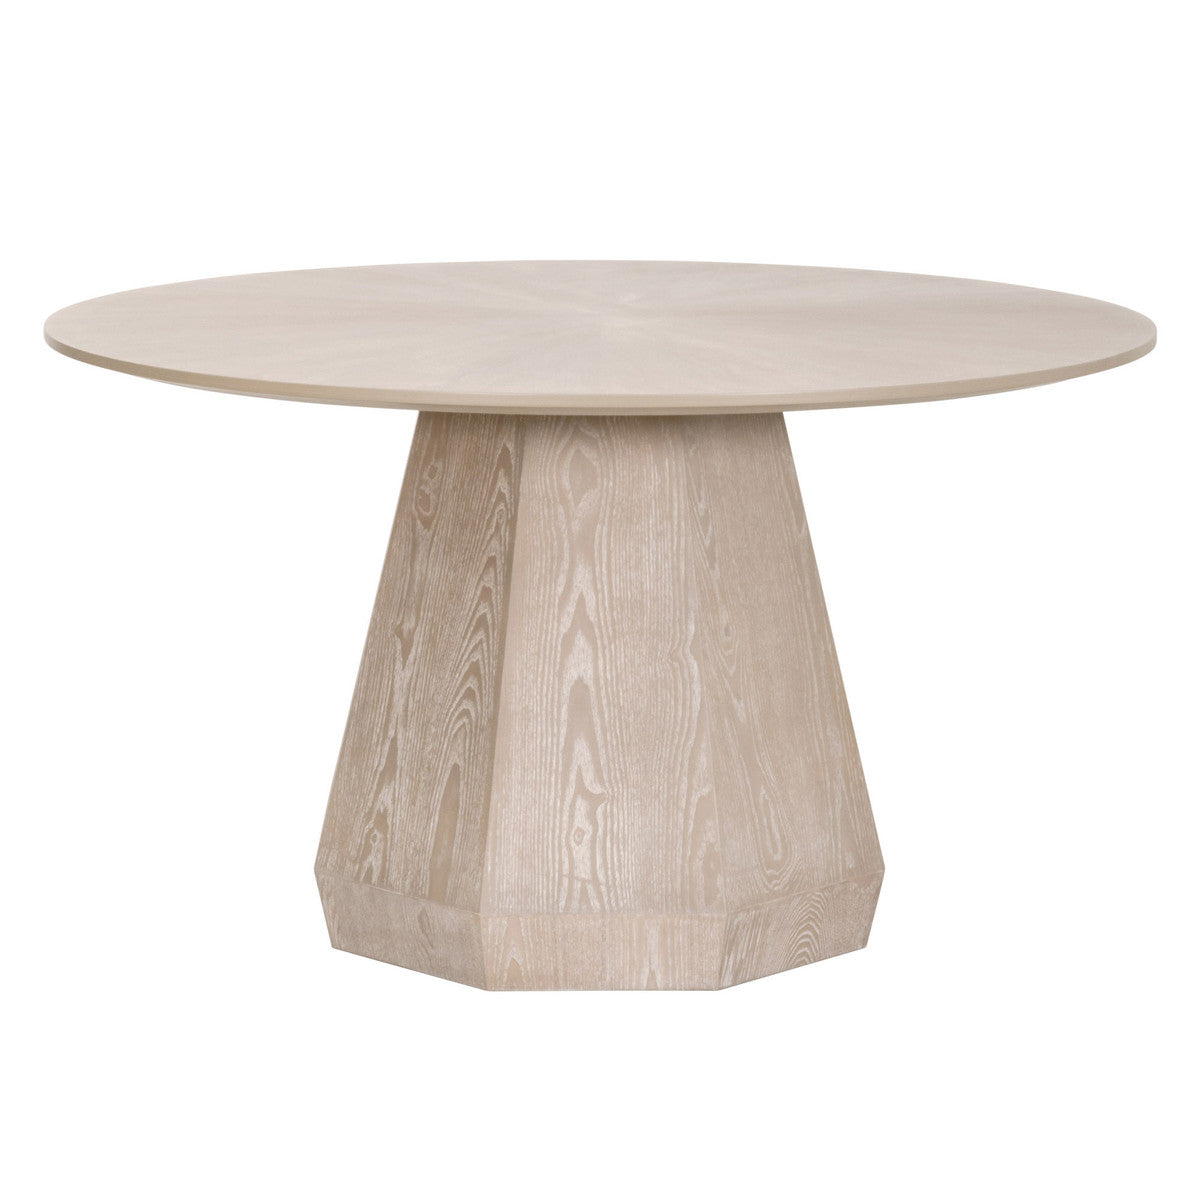 Colin 54" Round Dining Table